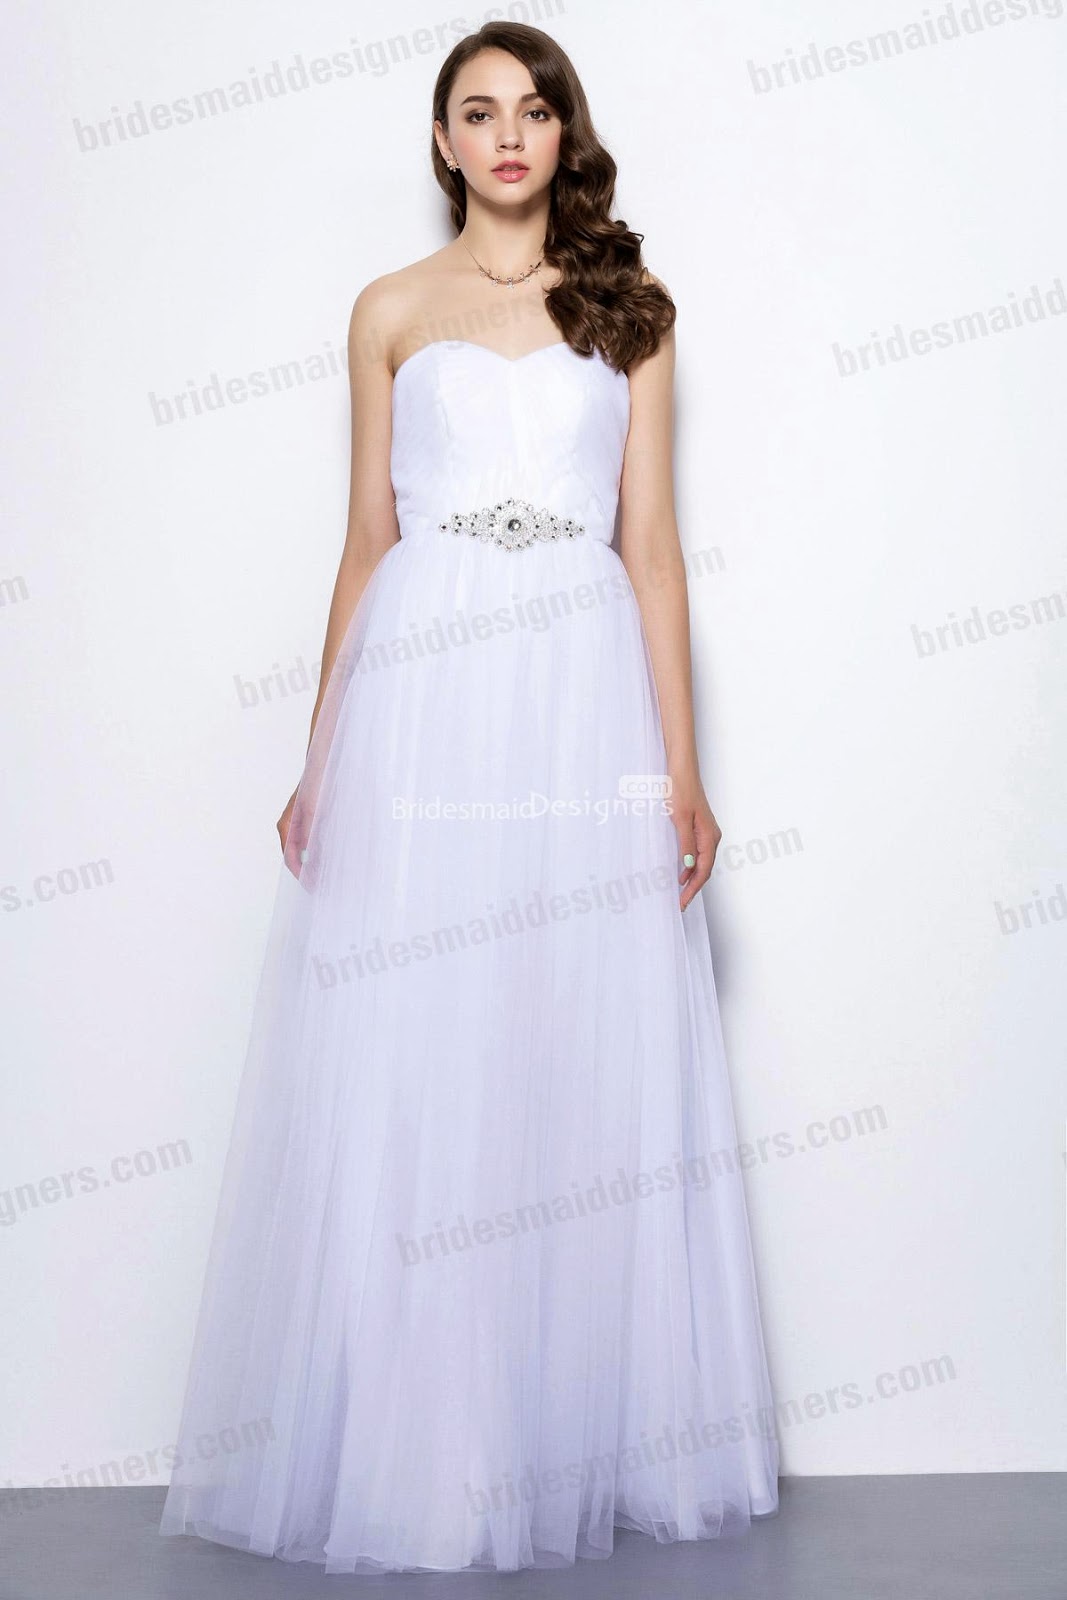 http://www.bridesmaiddesigners.com/strapless-sweetheart-beaded-low-back-white-tulle-long-bridesmaid-dress-1054.html